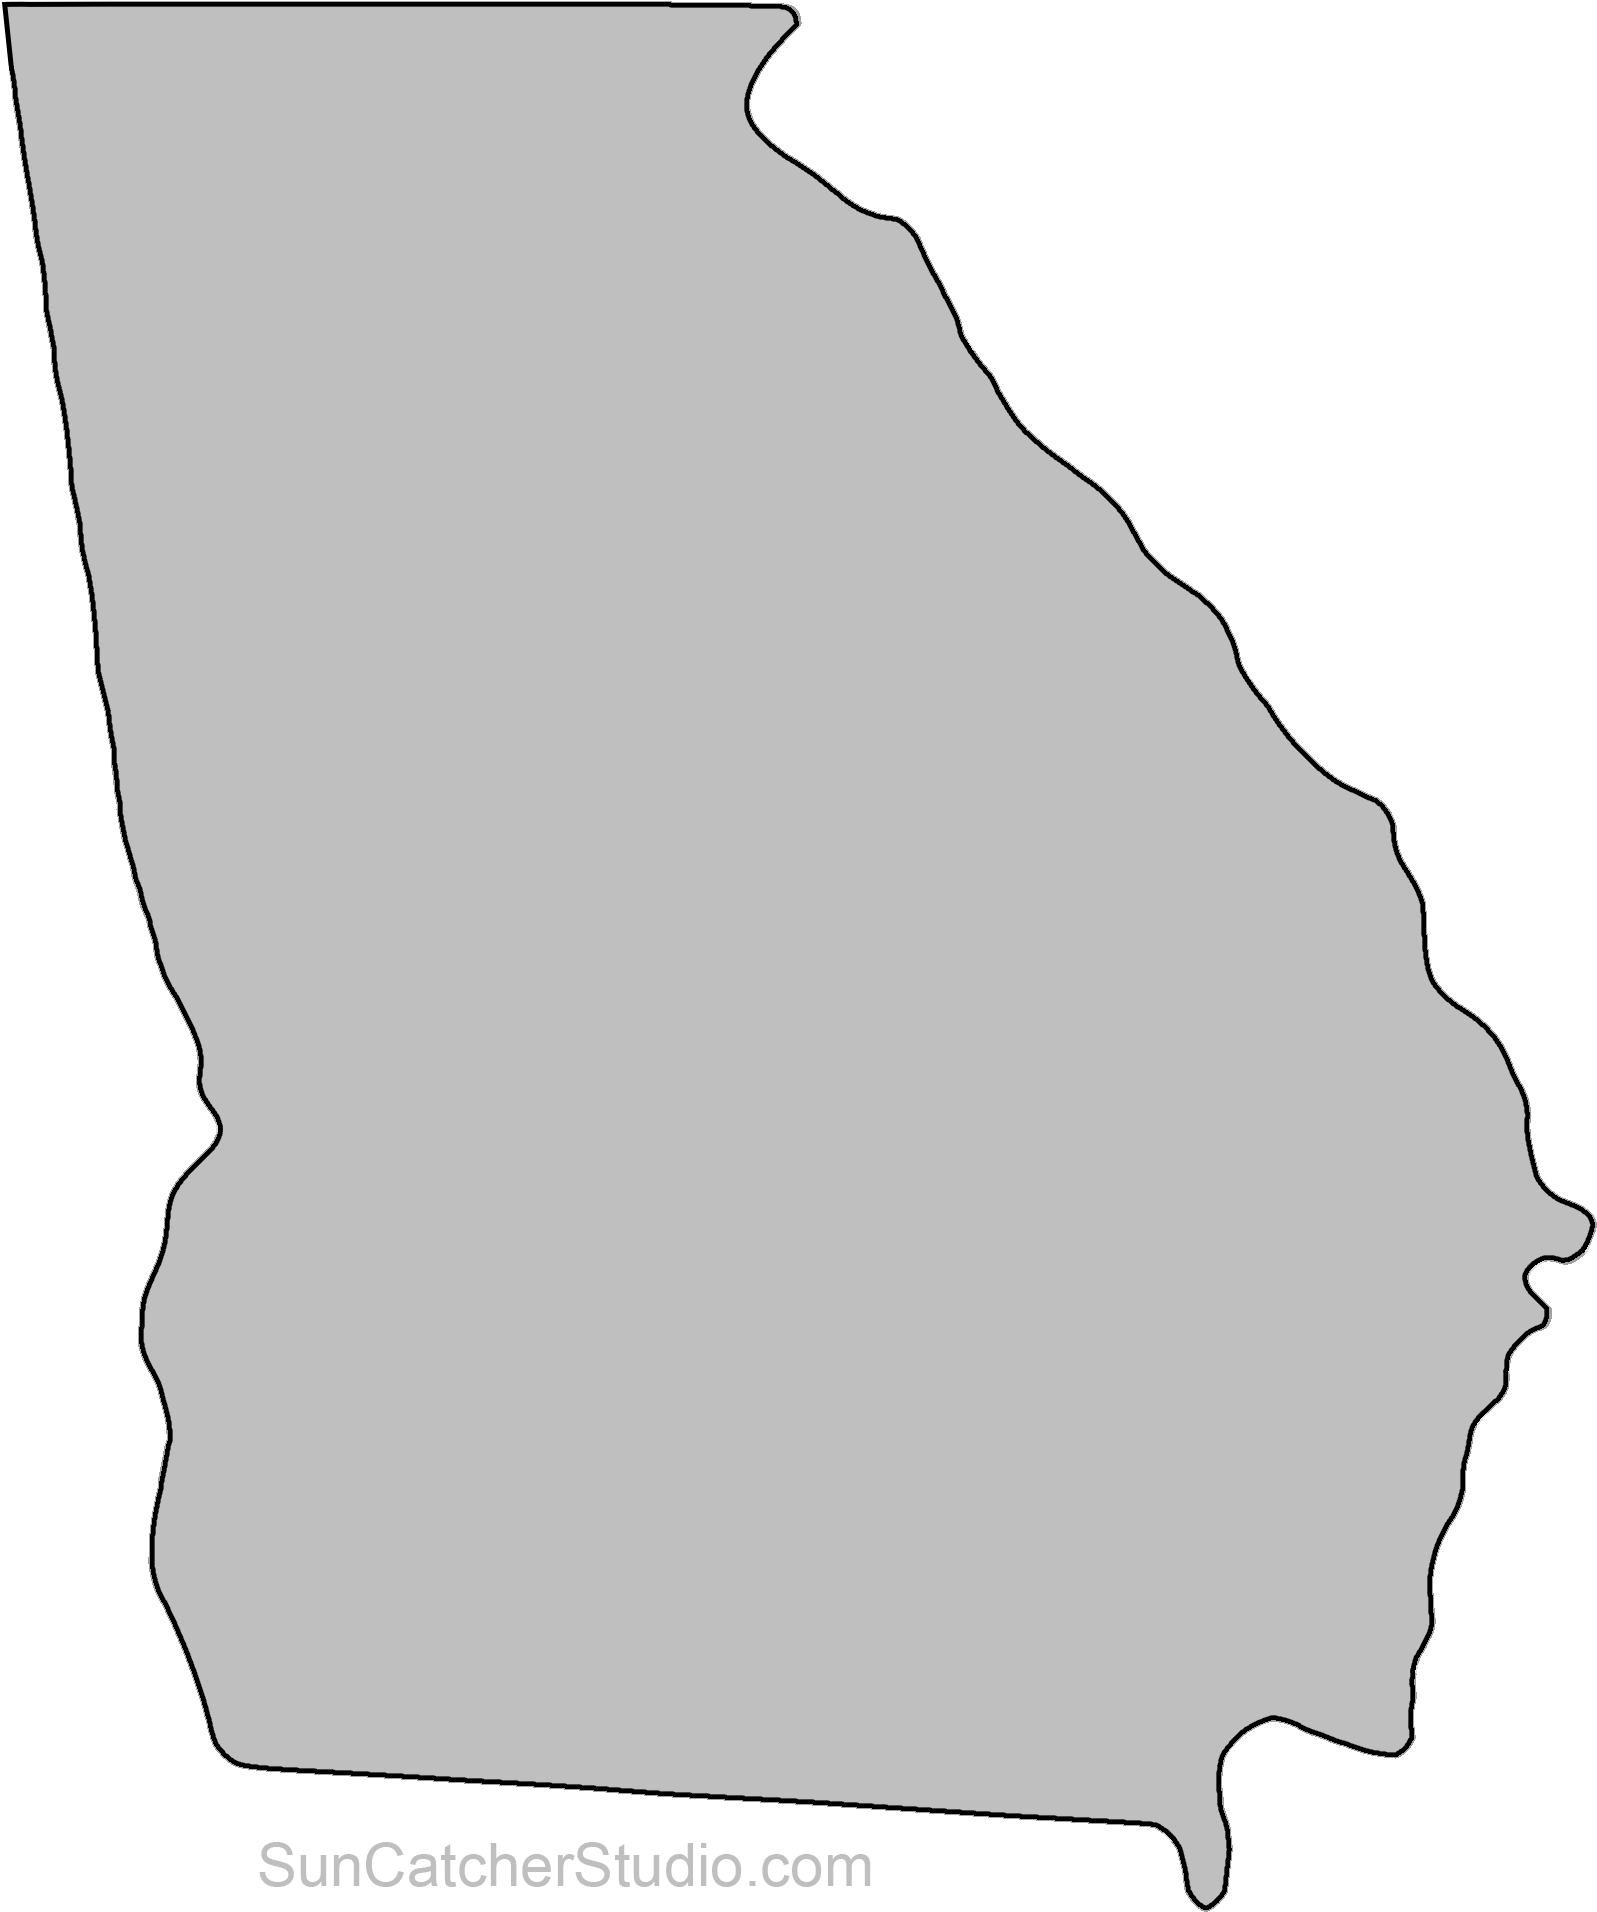 A Grey Outline Of A State